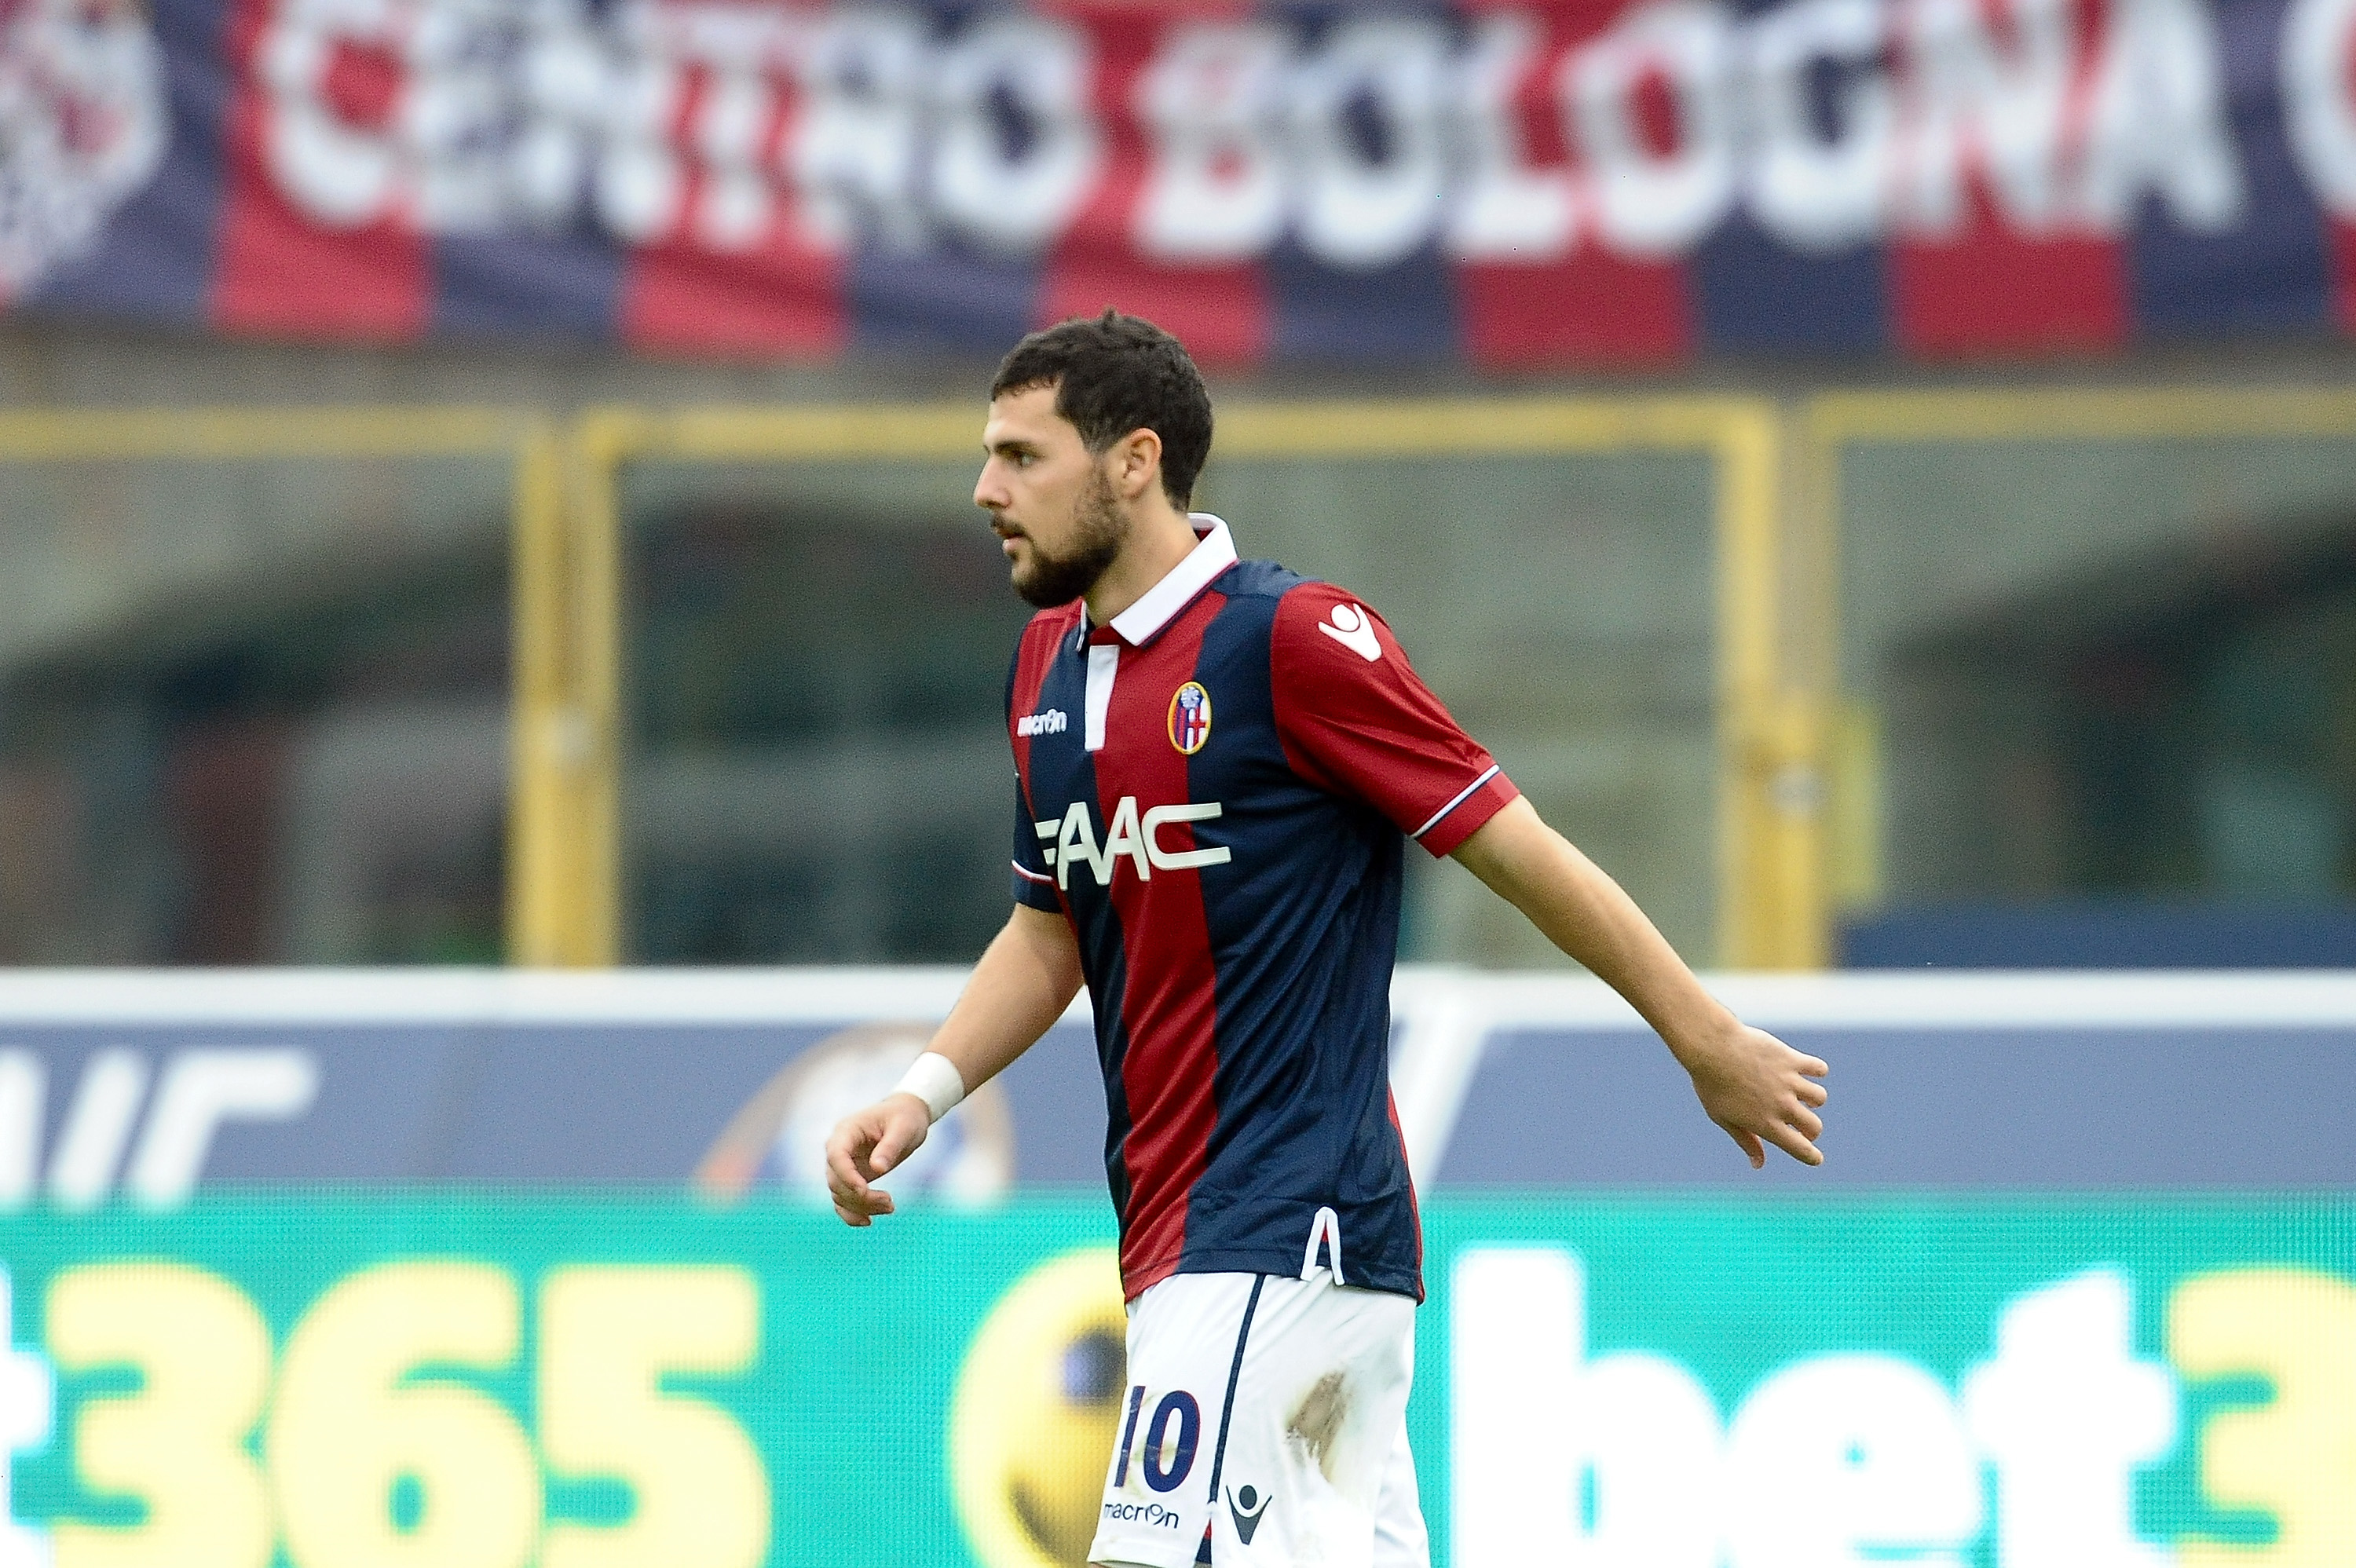 Video – Inter Announce Second Episode Of ‘Inter Roots’ To Be About Genoa’s Mattia Destro